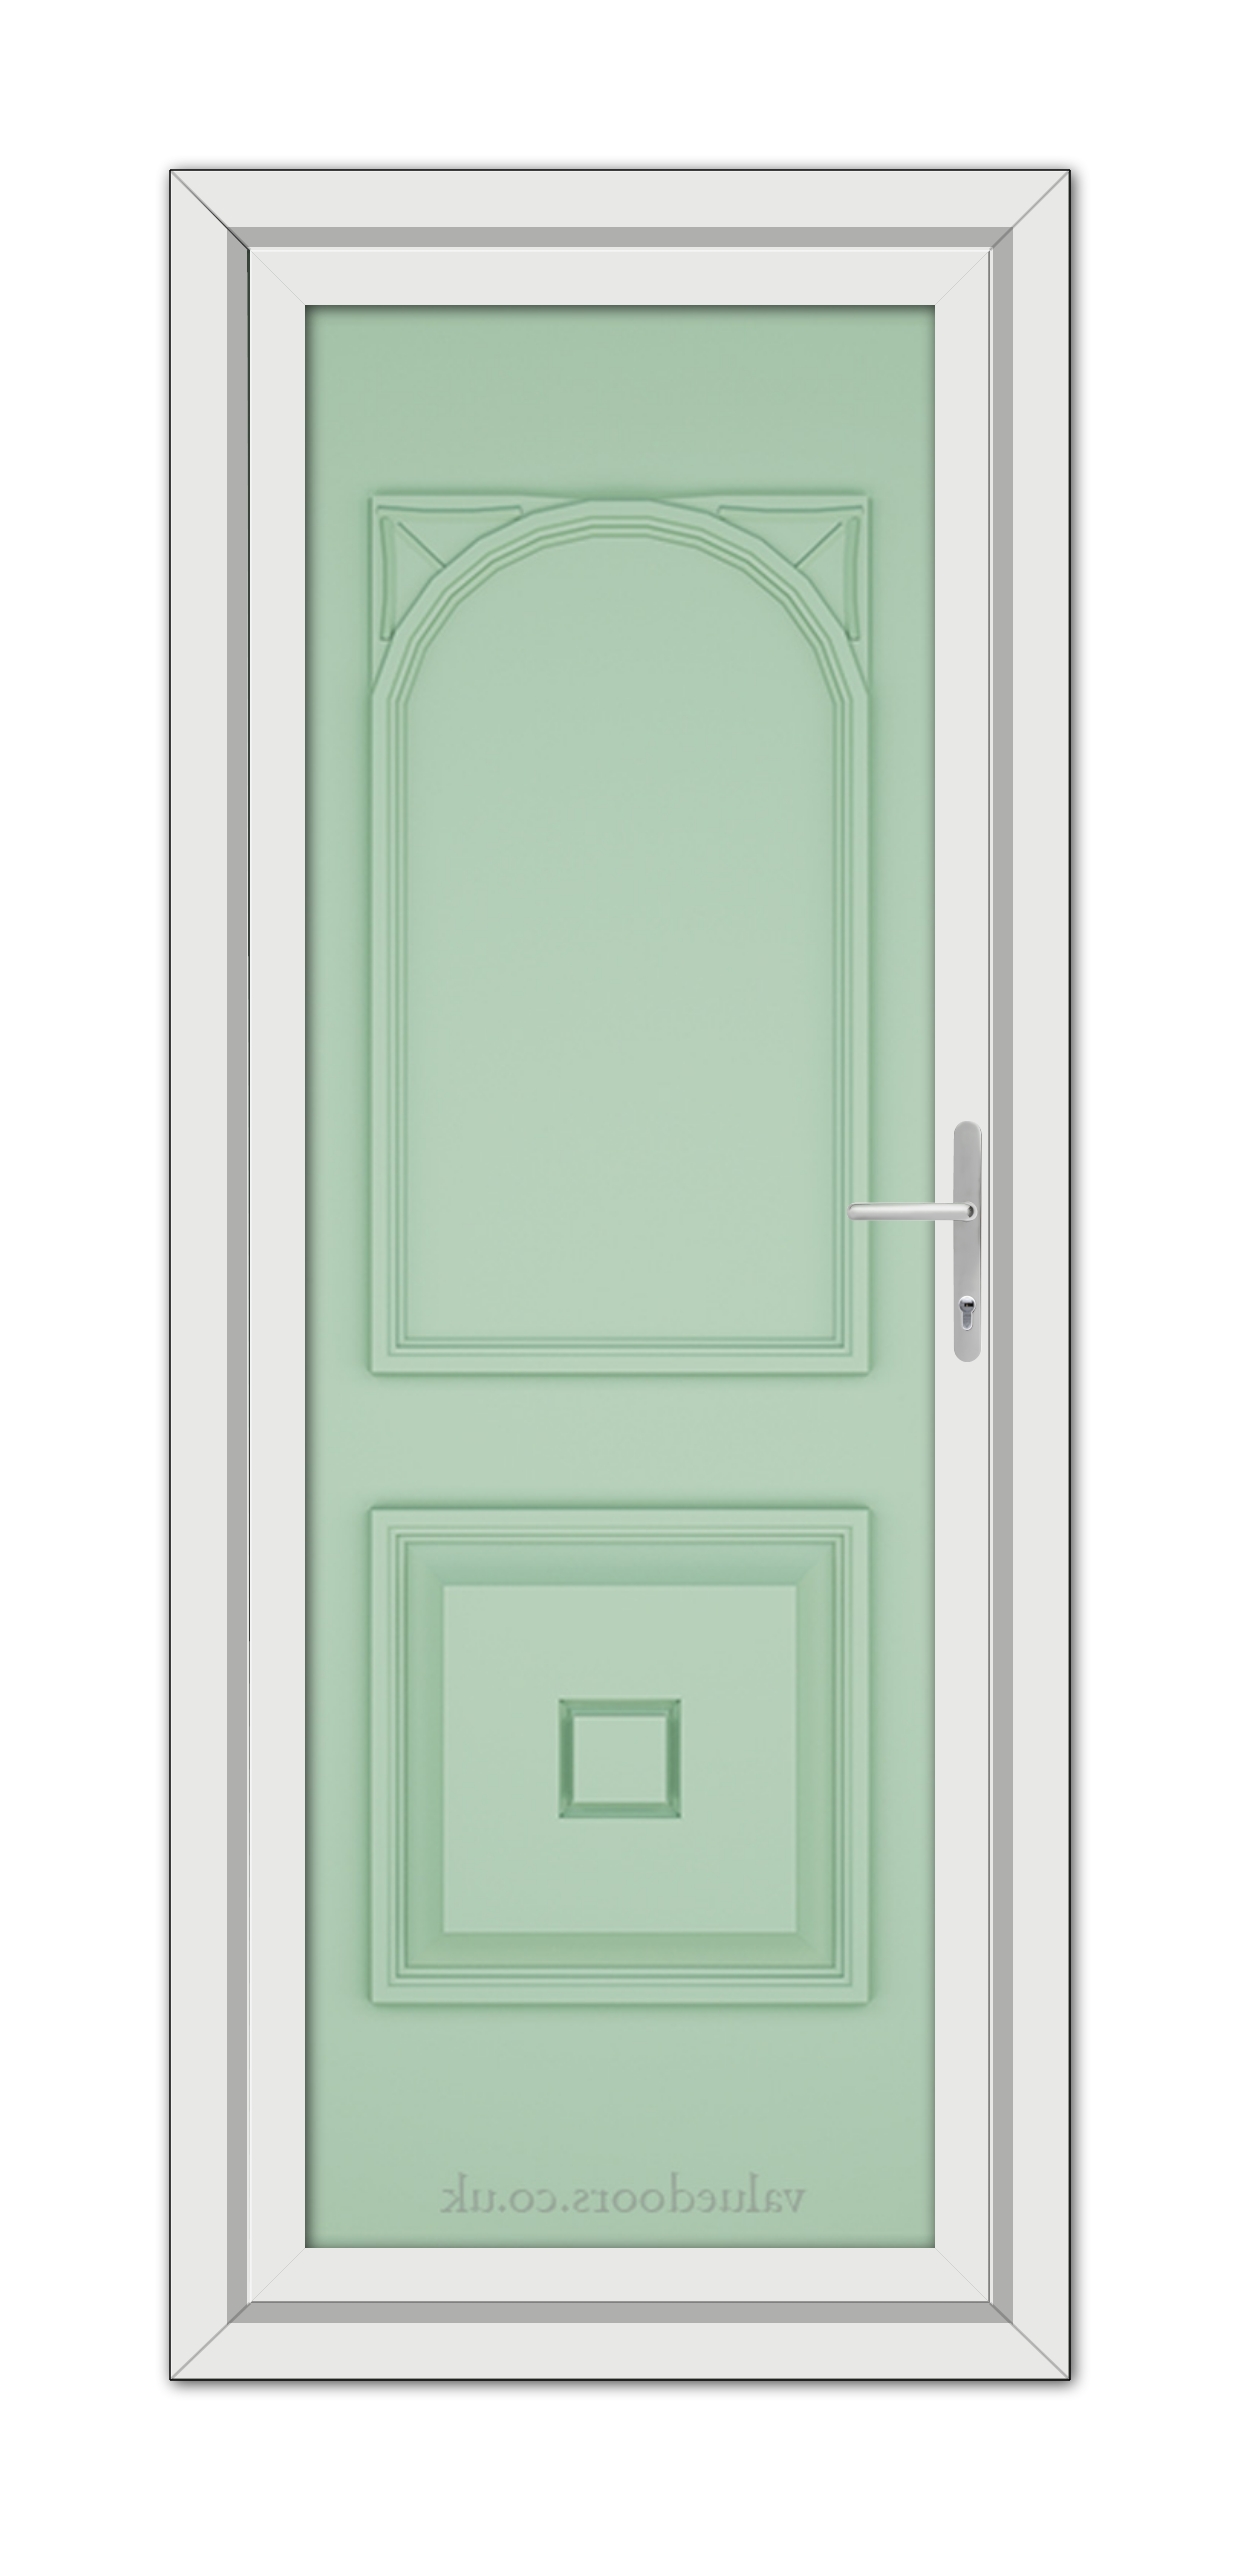 A close-up of a Chartwell Green Reims Solid uPVC Door.